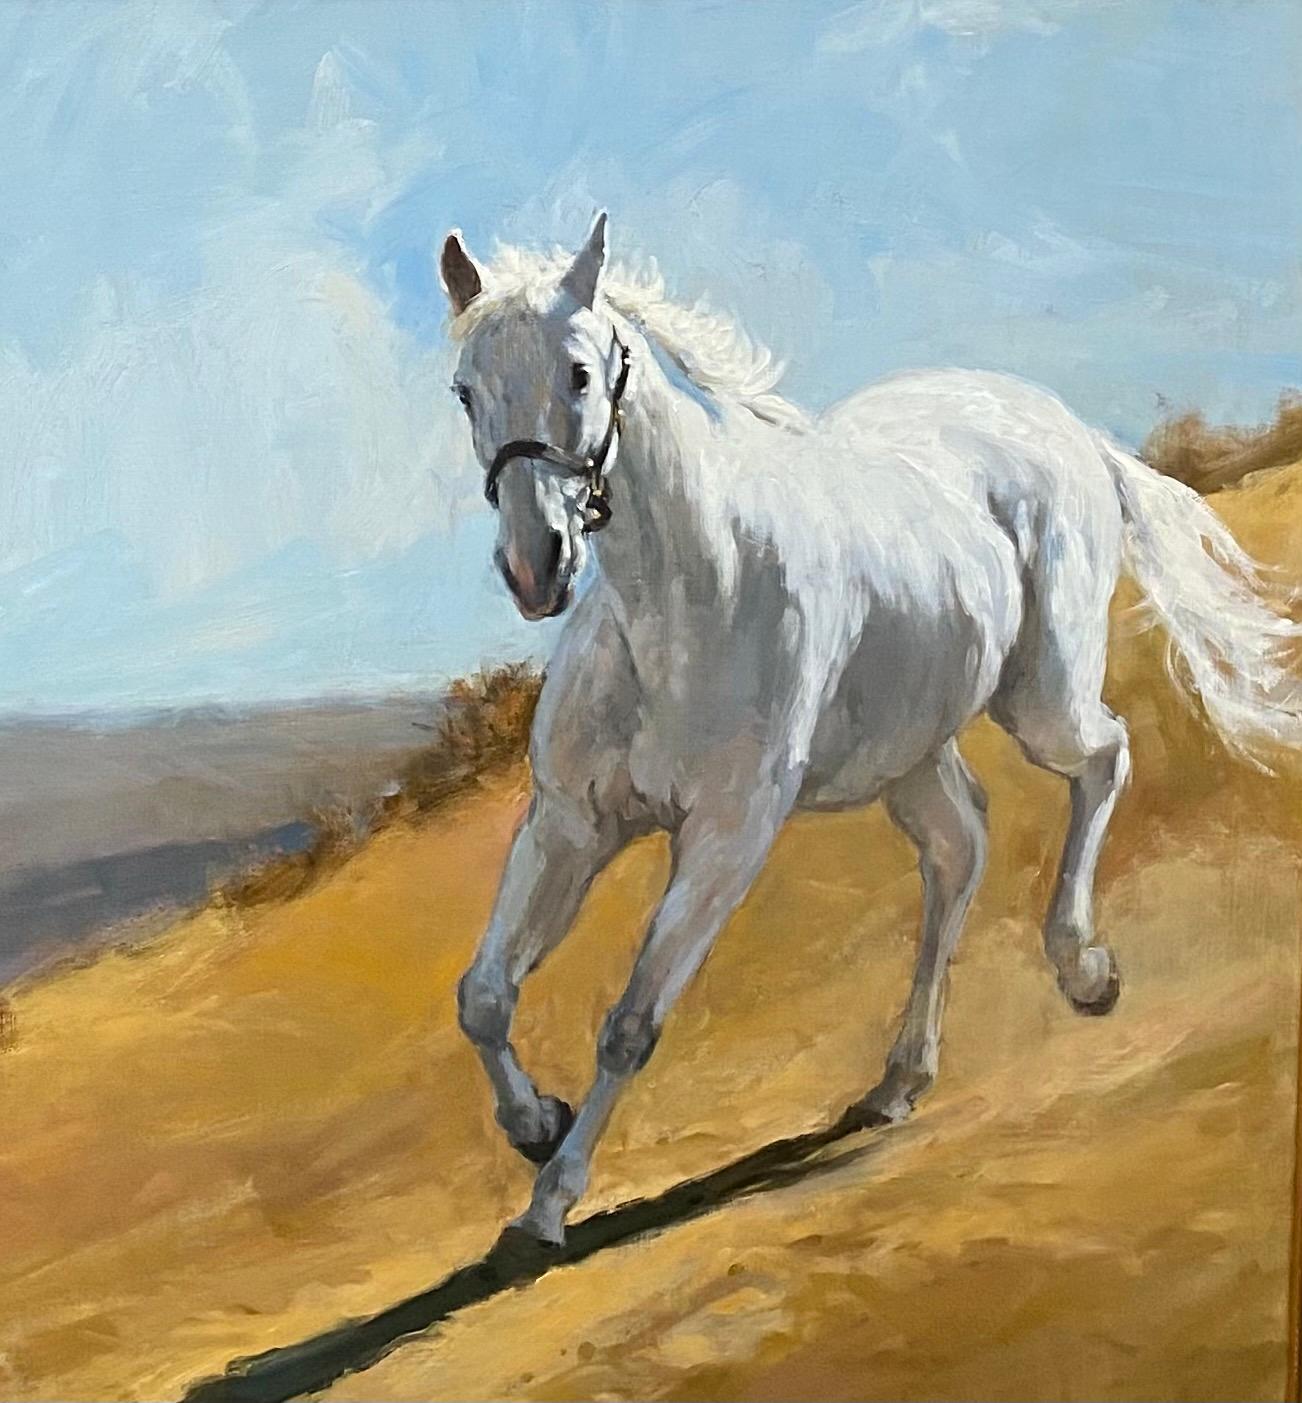 Bearing the light,  this elegant, white horse, commands respect as he gallops freely down the mountain towards the meadow below. So gracefully he establishes his dominion over this equestrian landscape.  This realistic depiction of power and grace